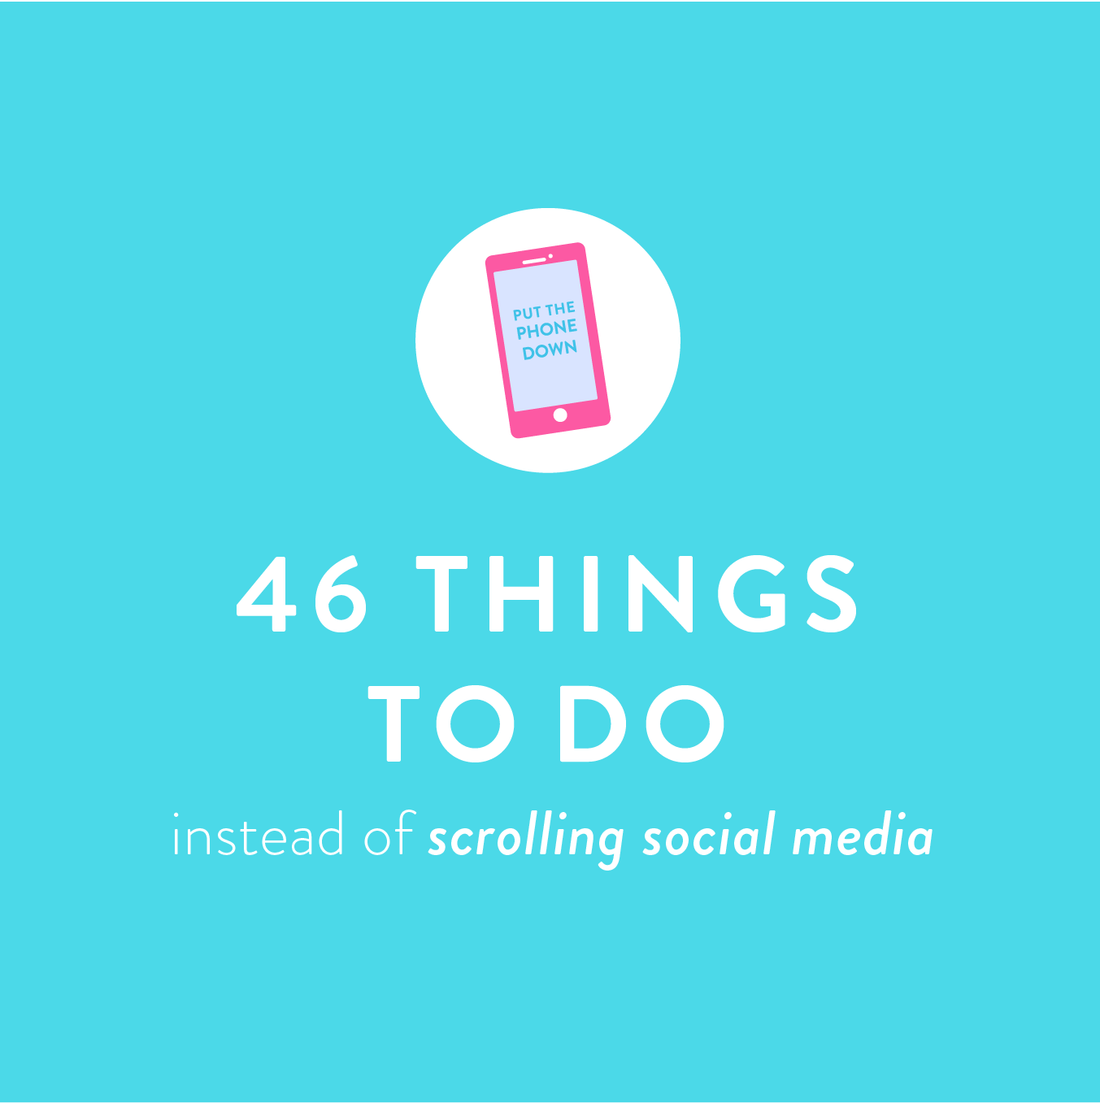 46 Productive Things to Do Instead of Scrolling Social Media